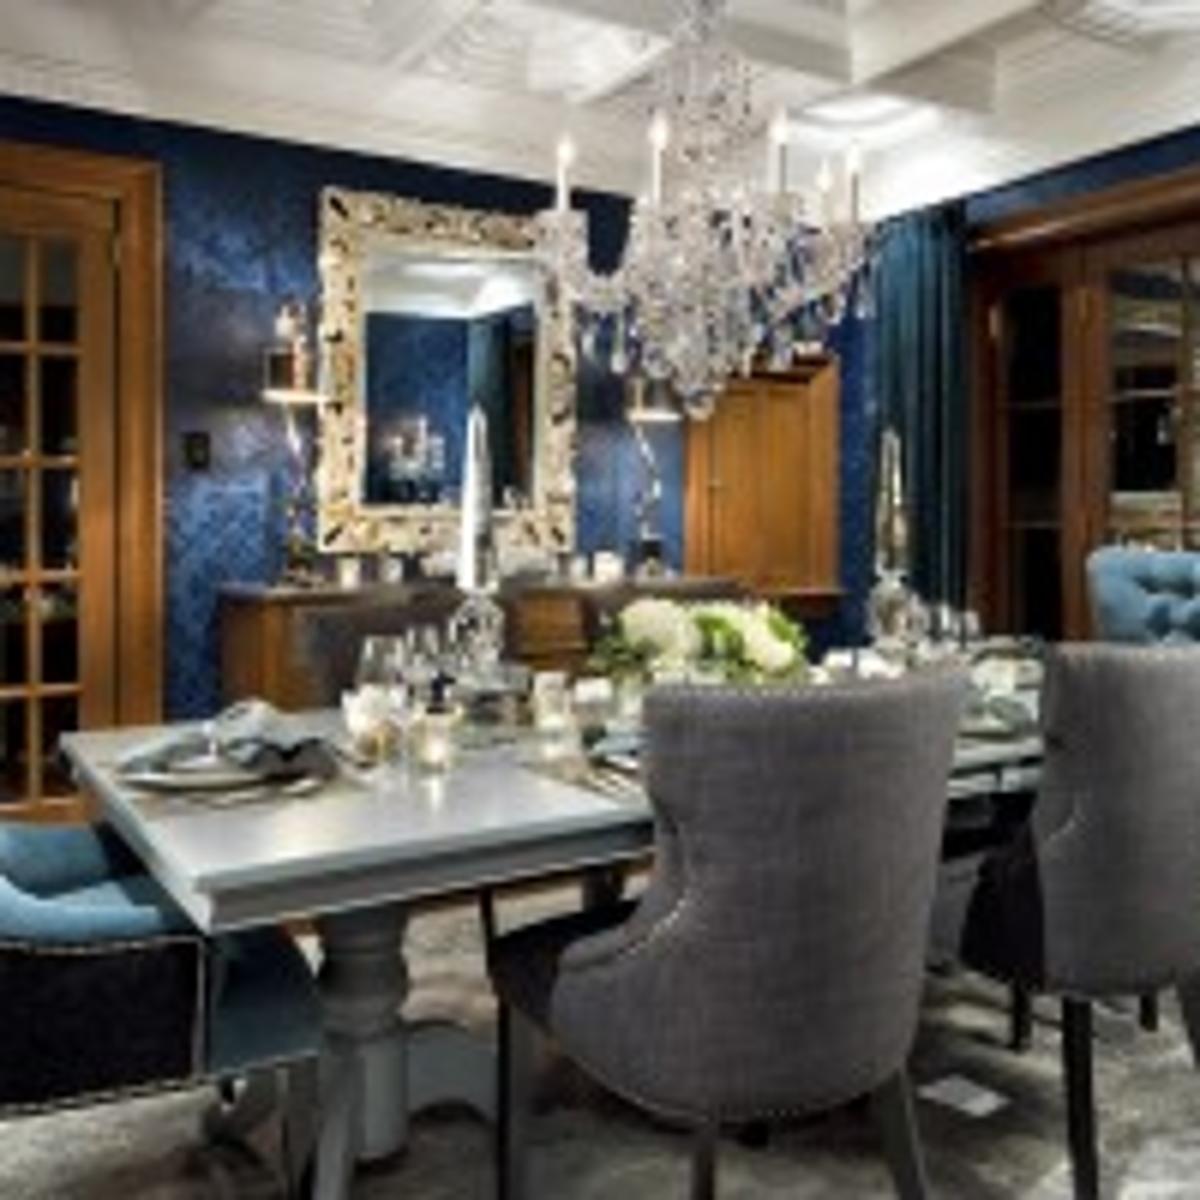 Candice Olson Dining Room Gets Dressed, Candice Olson Chandelier Wallpaper 2020